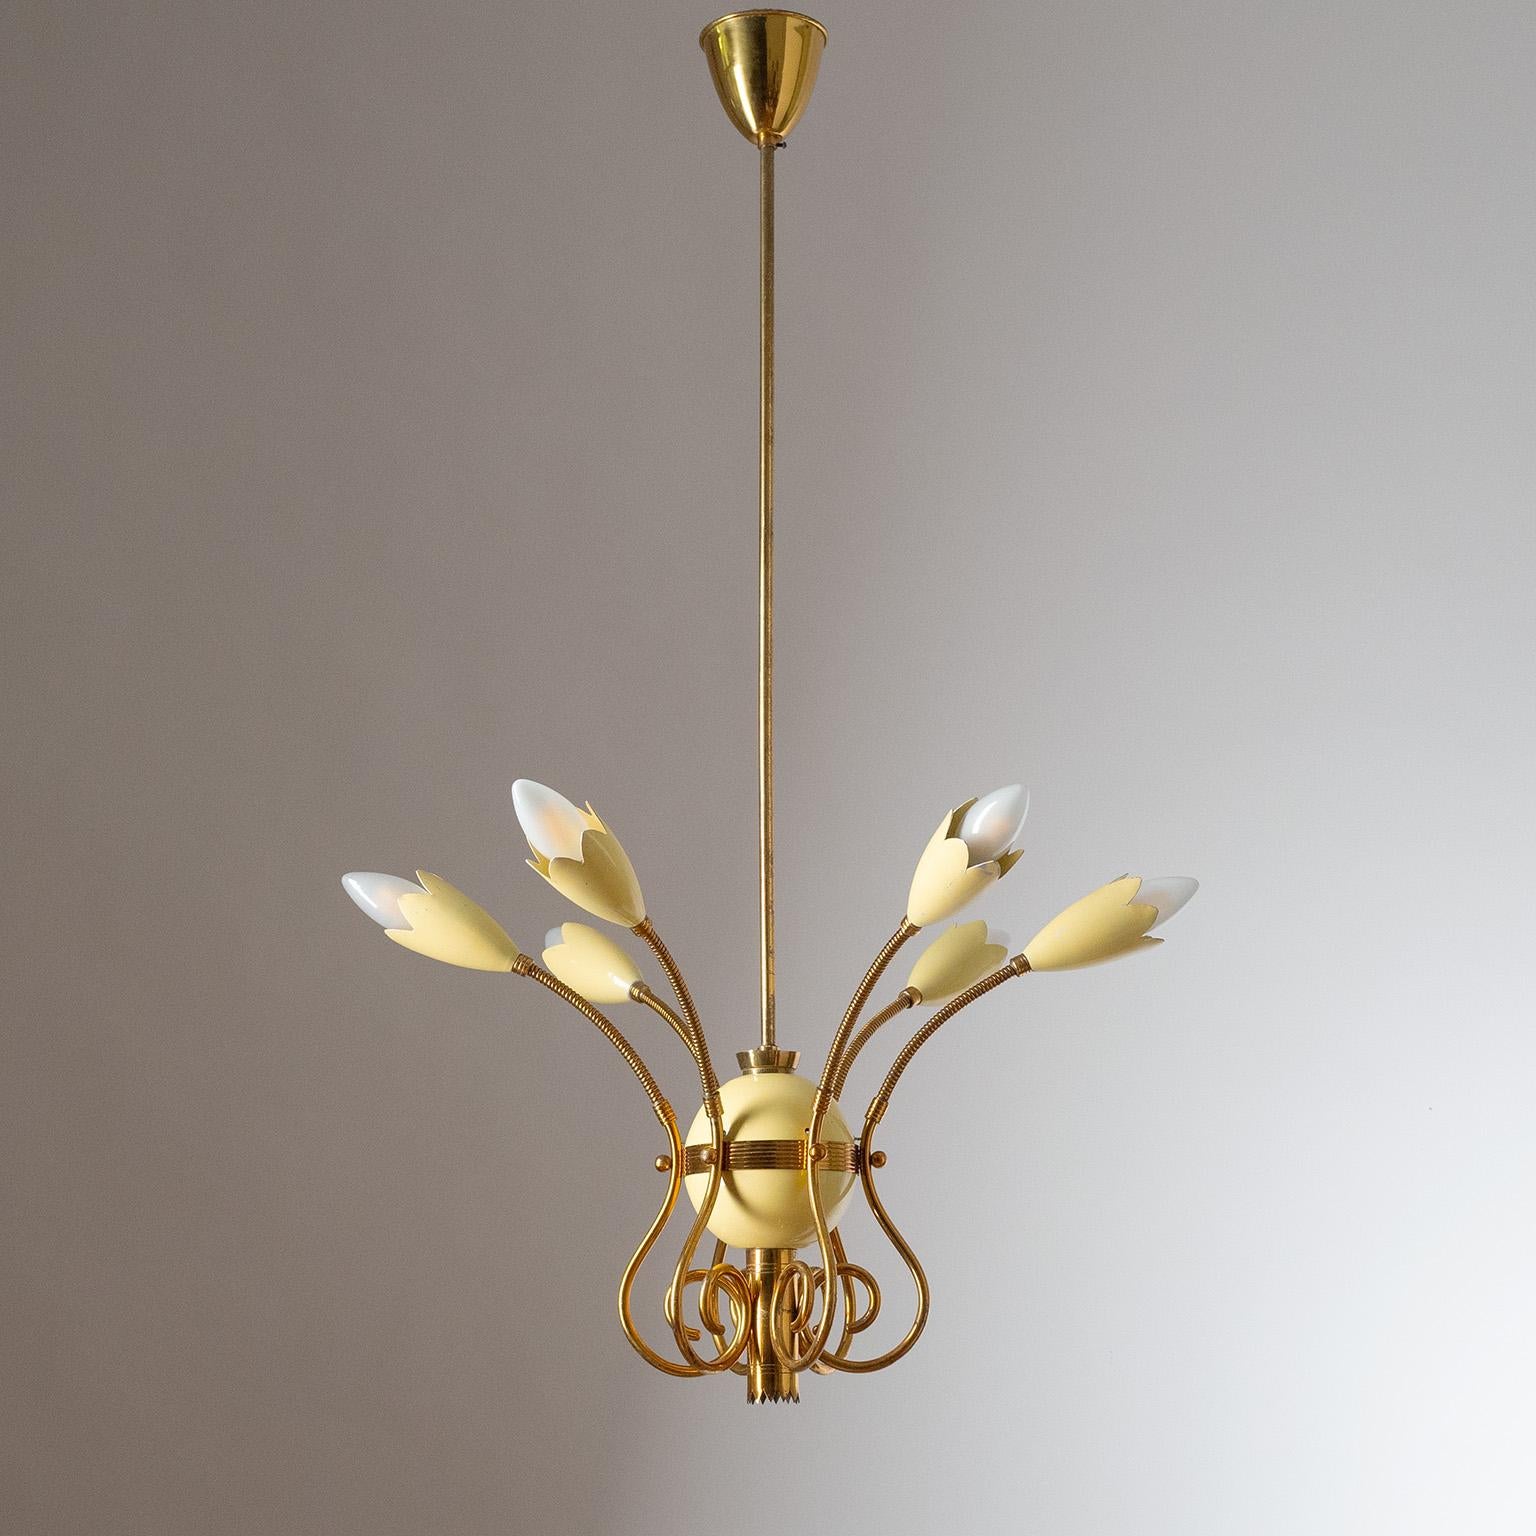 Rare Italian six-arm brass chandelier from the 1940s. Intricate brass decorations and rare brass 'goose neck' arms, allowing for various positions and lighting settings. Socket covers and central globe are lacquered aluminum with original paint. Six